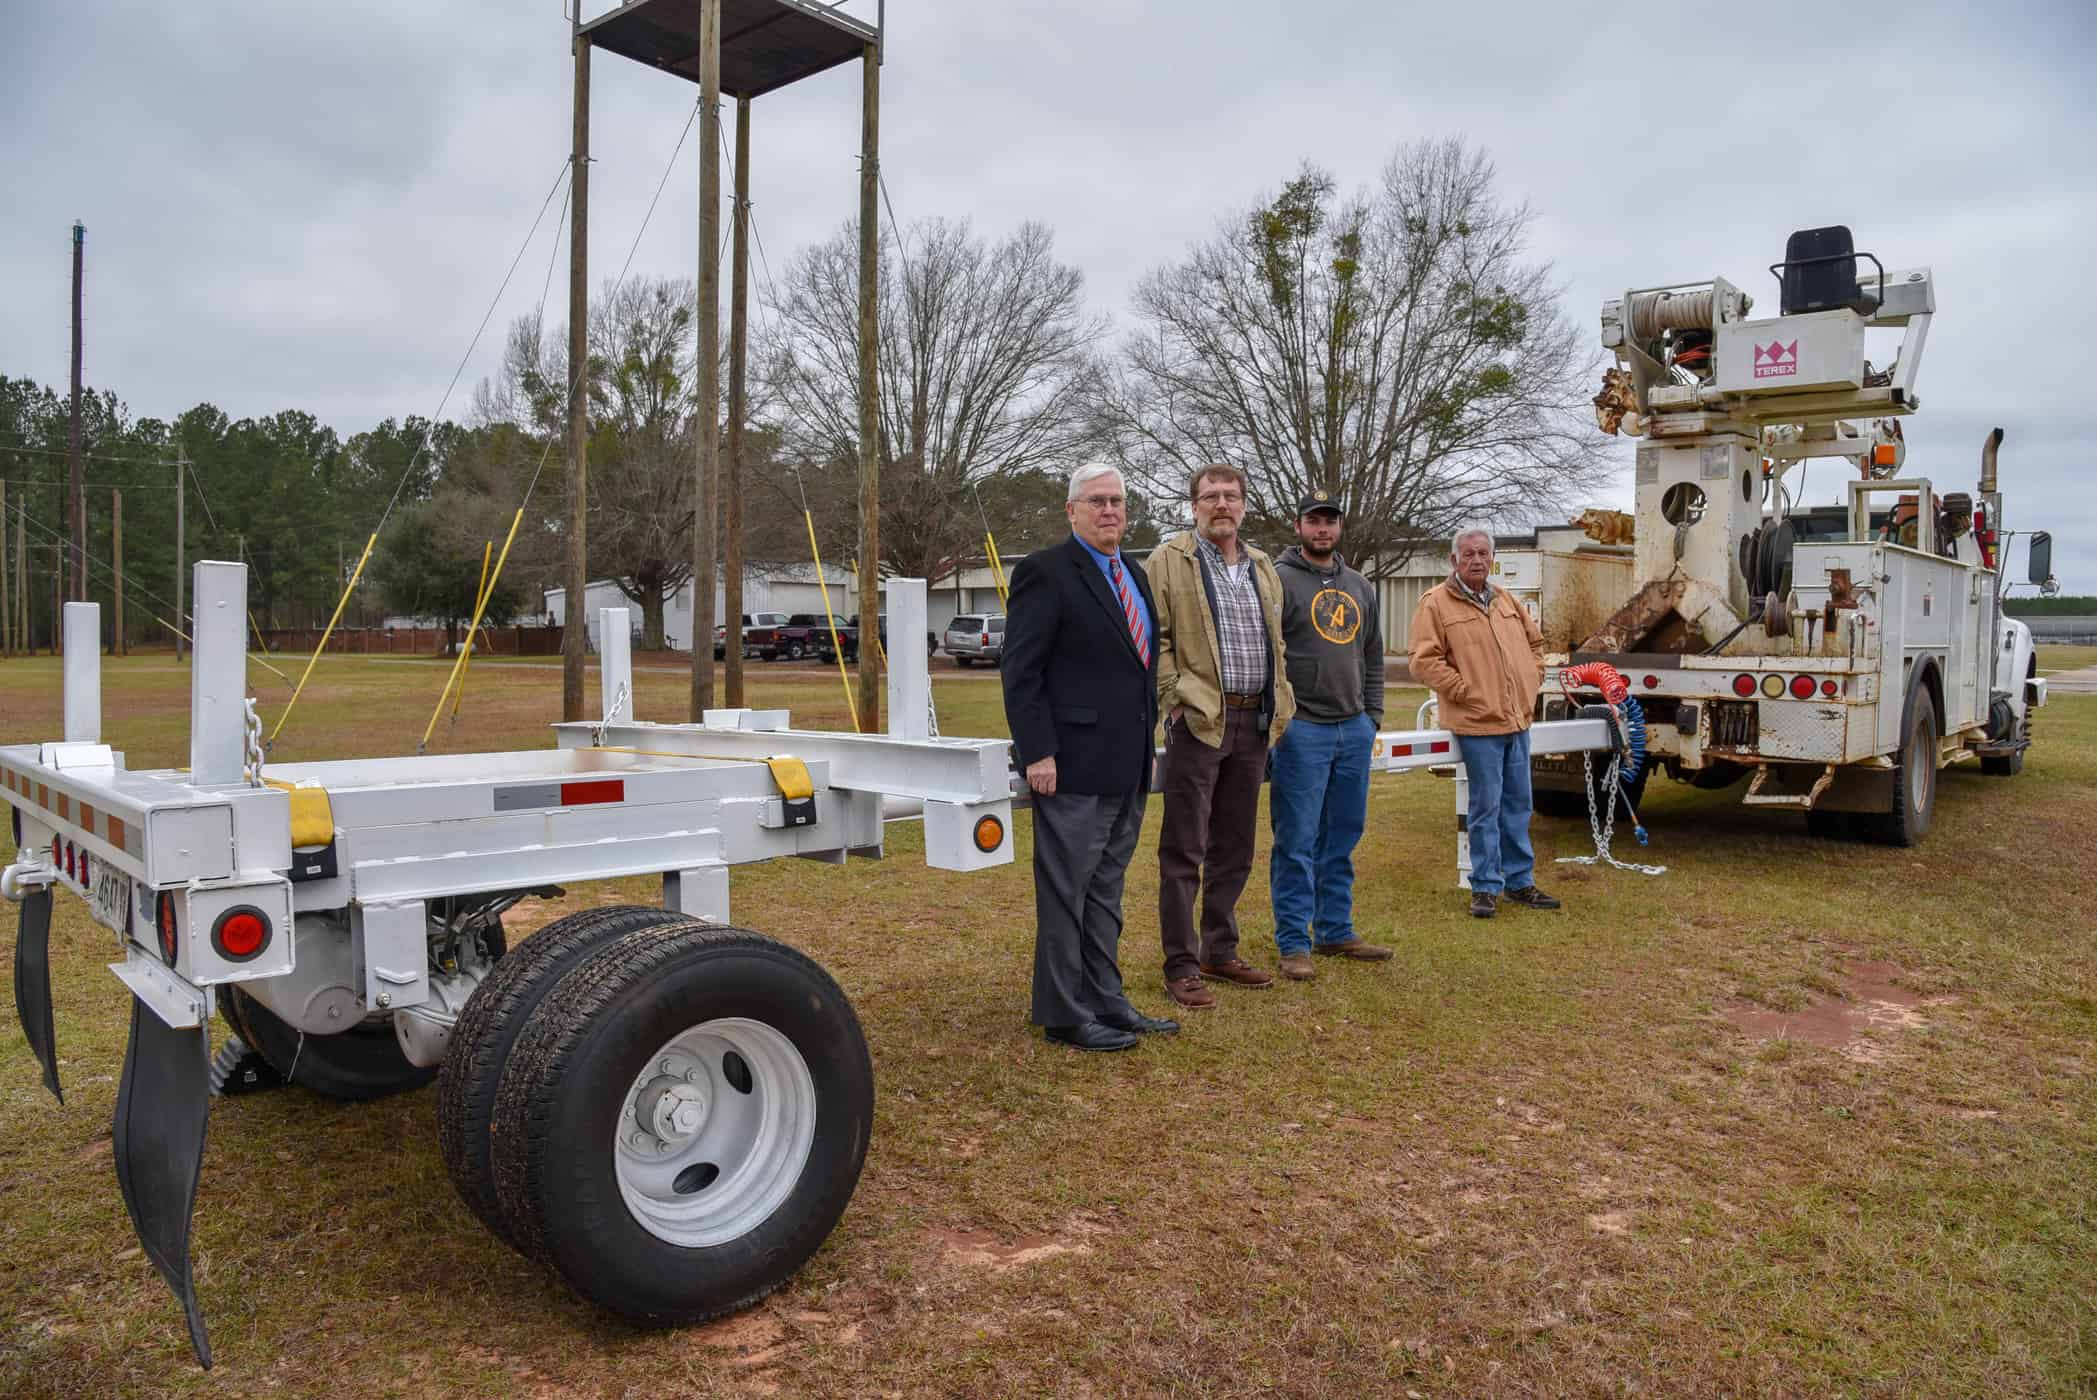 Standing beside the donated pole trailer are: Wally Summers, vice president of economic development at South Georgia Tech; Bubba Allen, general foreman at Diverse Power; Tyler Florers, a former SGTC student in the lineworker program who now works for Diverse Power; and Dewey Turner, SGTC lineworker instructor.